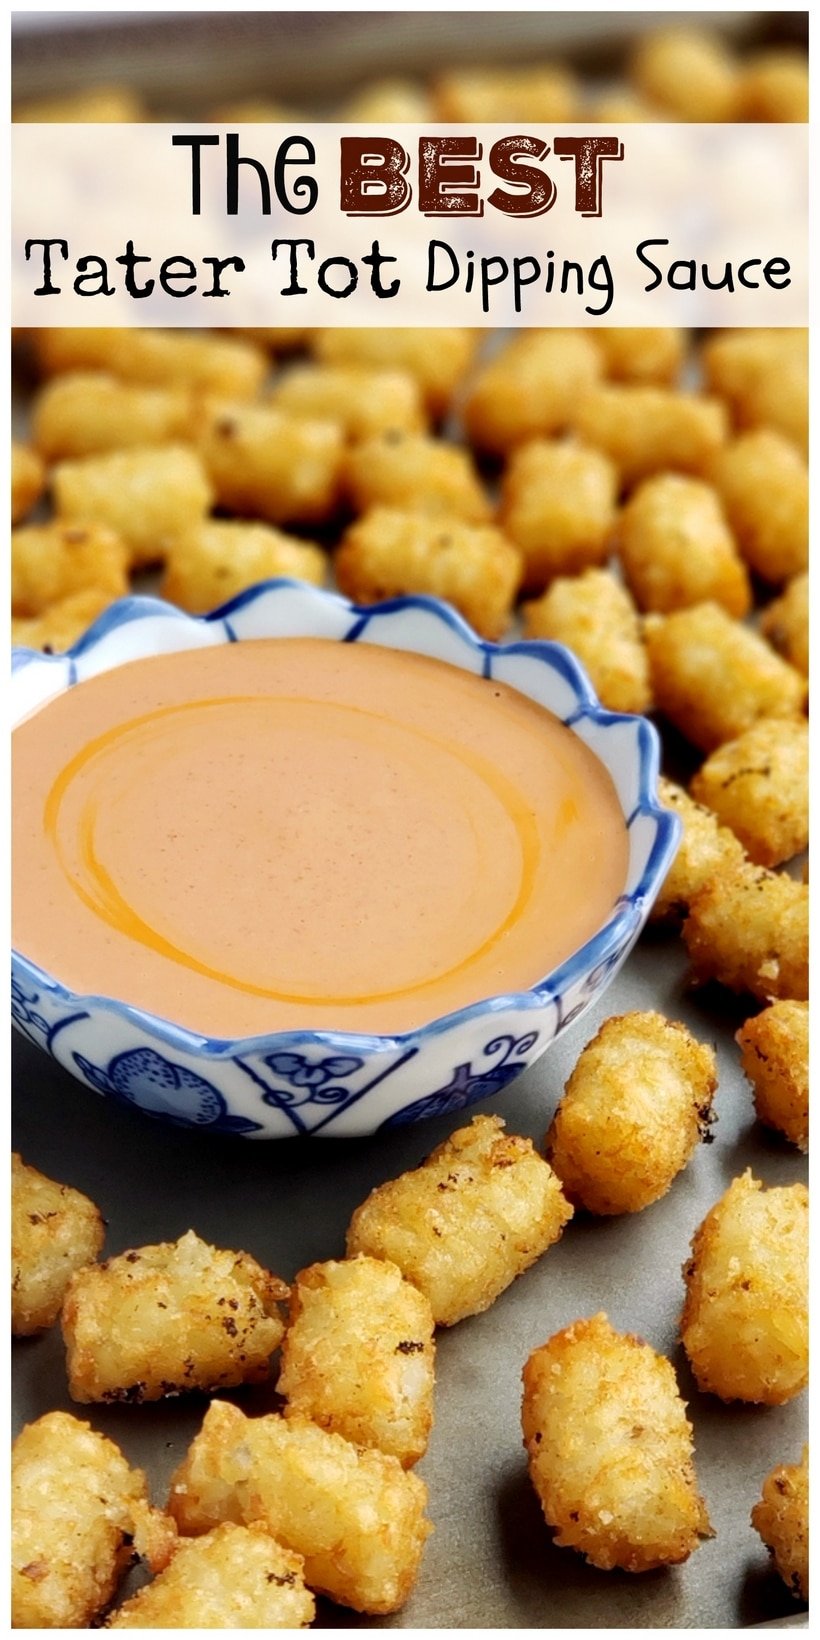 Save the plain ketchup for the kids and make the Best Tater Tot Dipping Sauce for those with a more mature palette. If you prefer a little spicy heat, this tot dipping sauce is for you. #noblepig #dippingsauce #tatertots #spicycauce via @cmpollak1